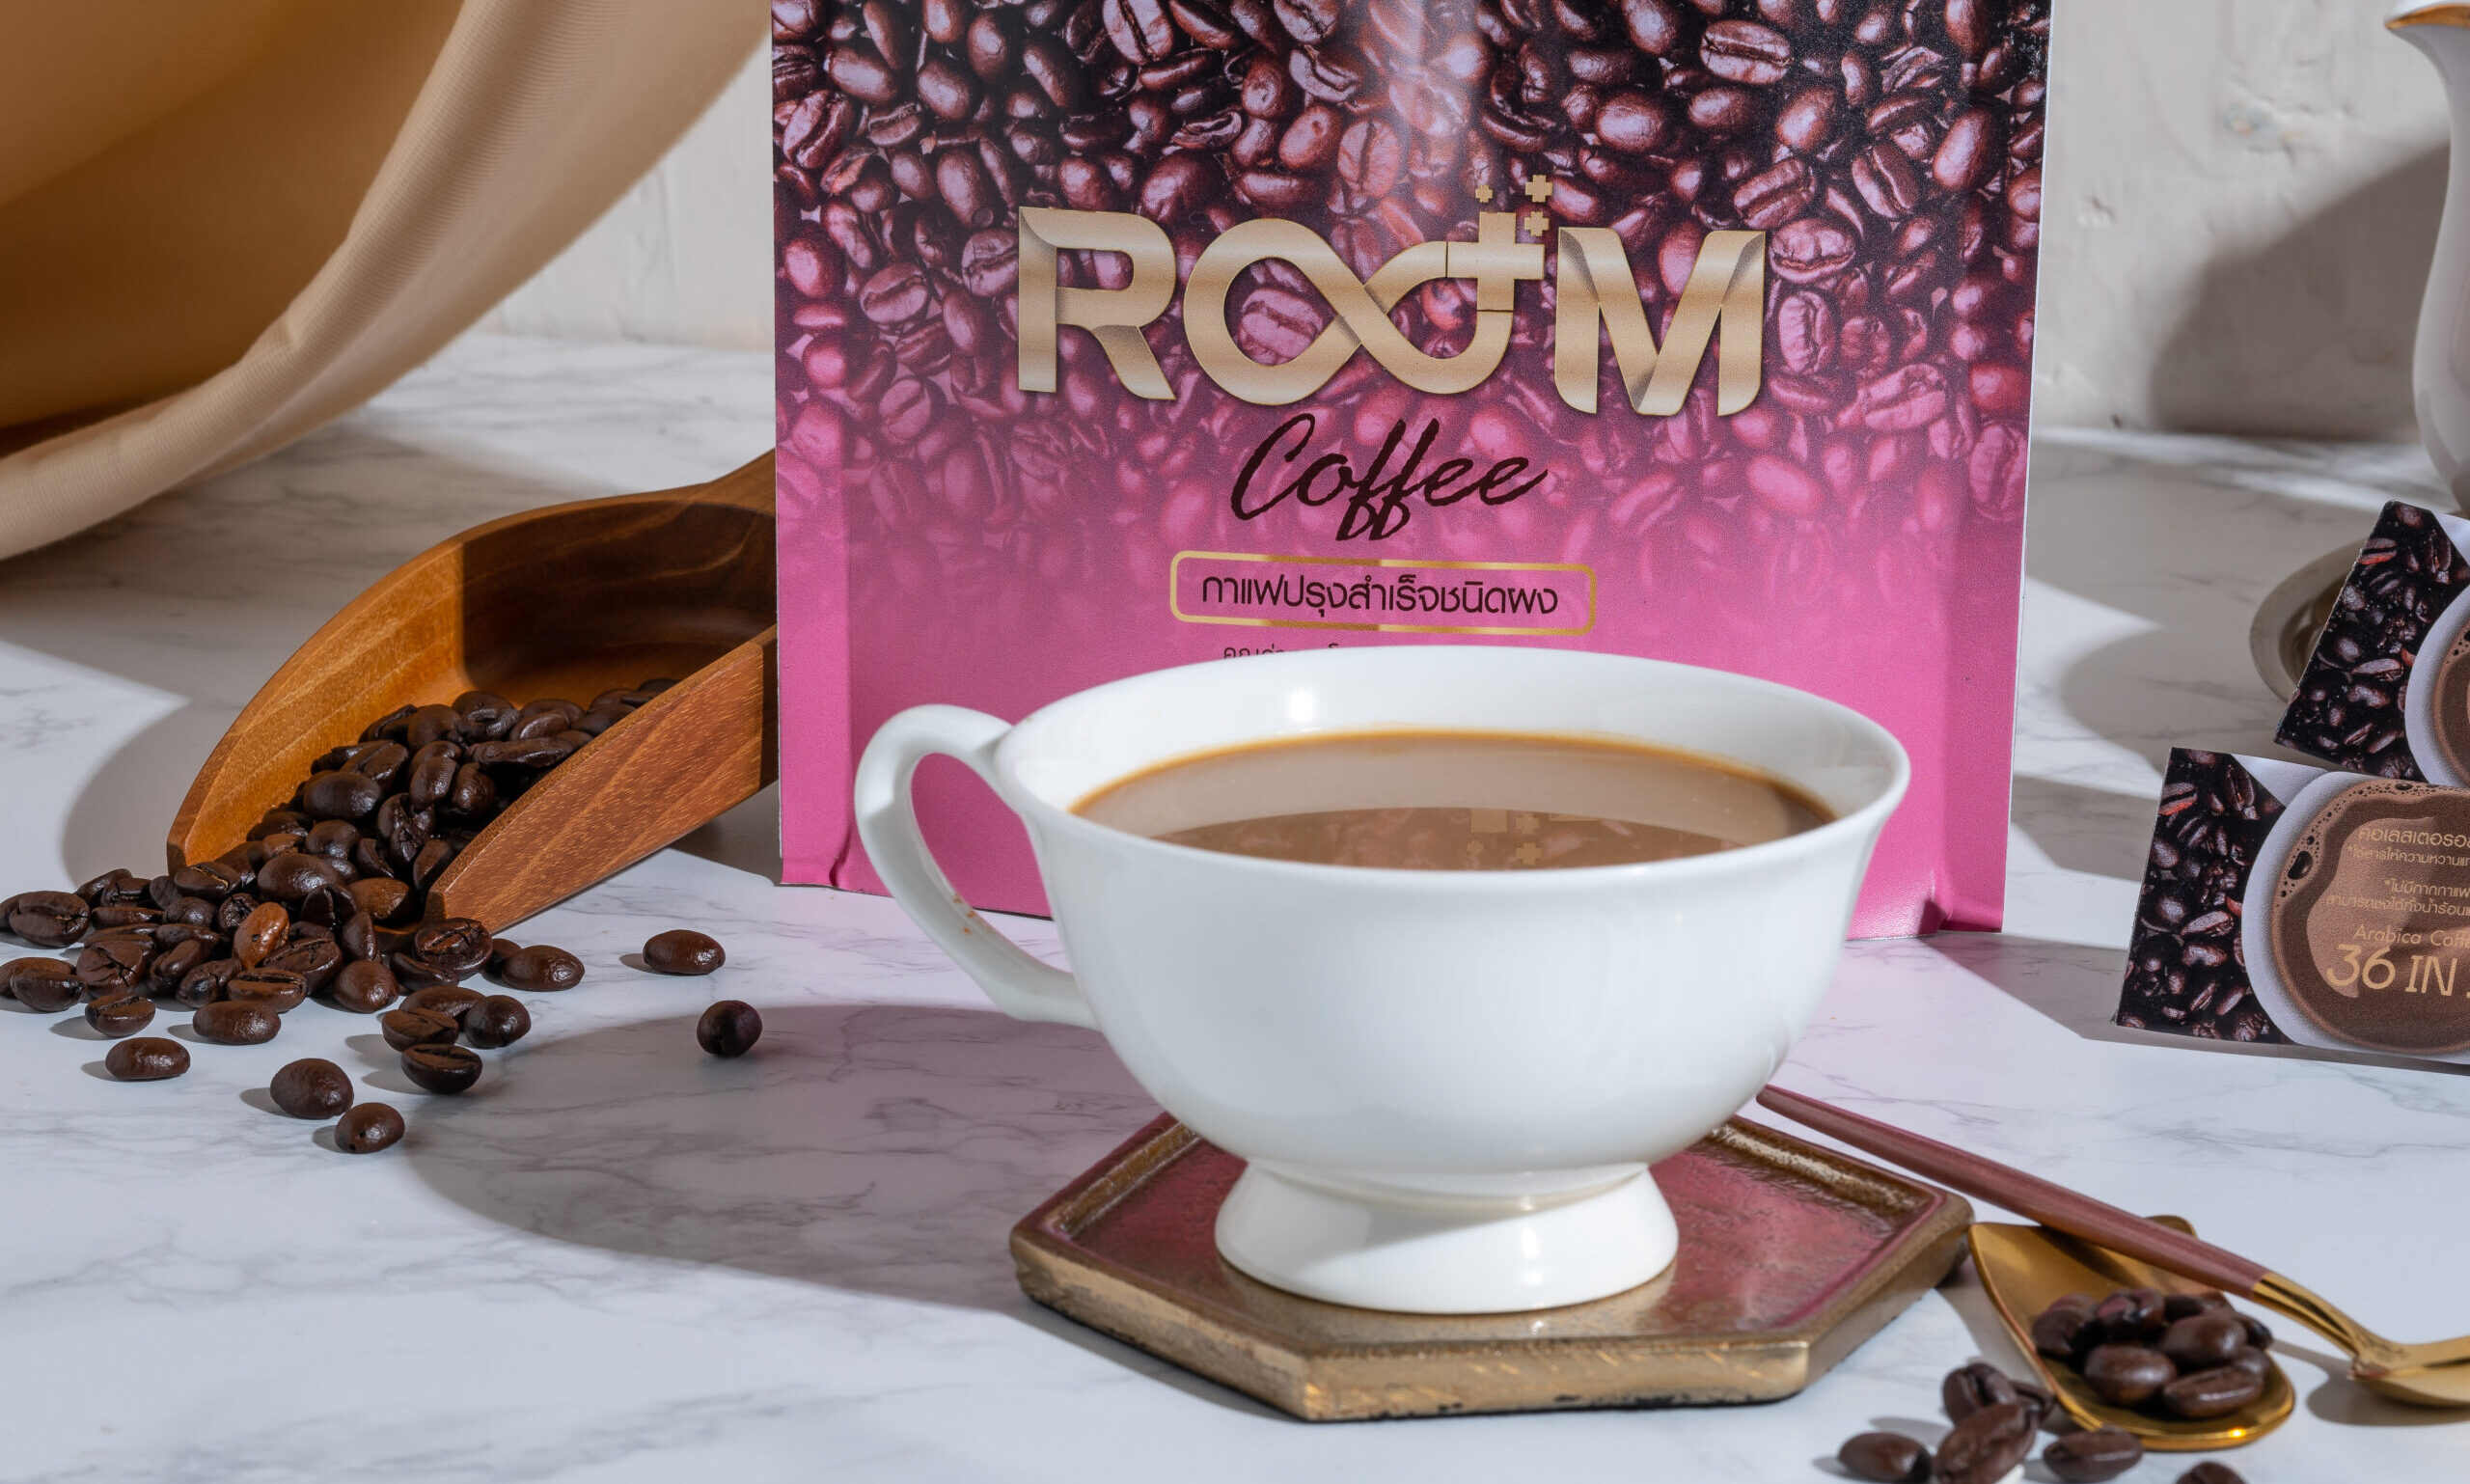 Room Coffee Product Image 301039 - The iCon Group